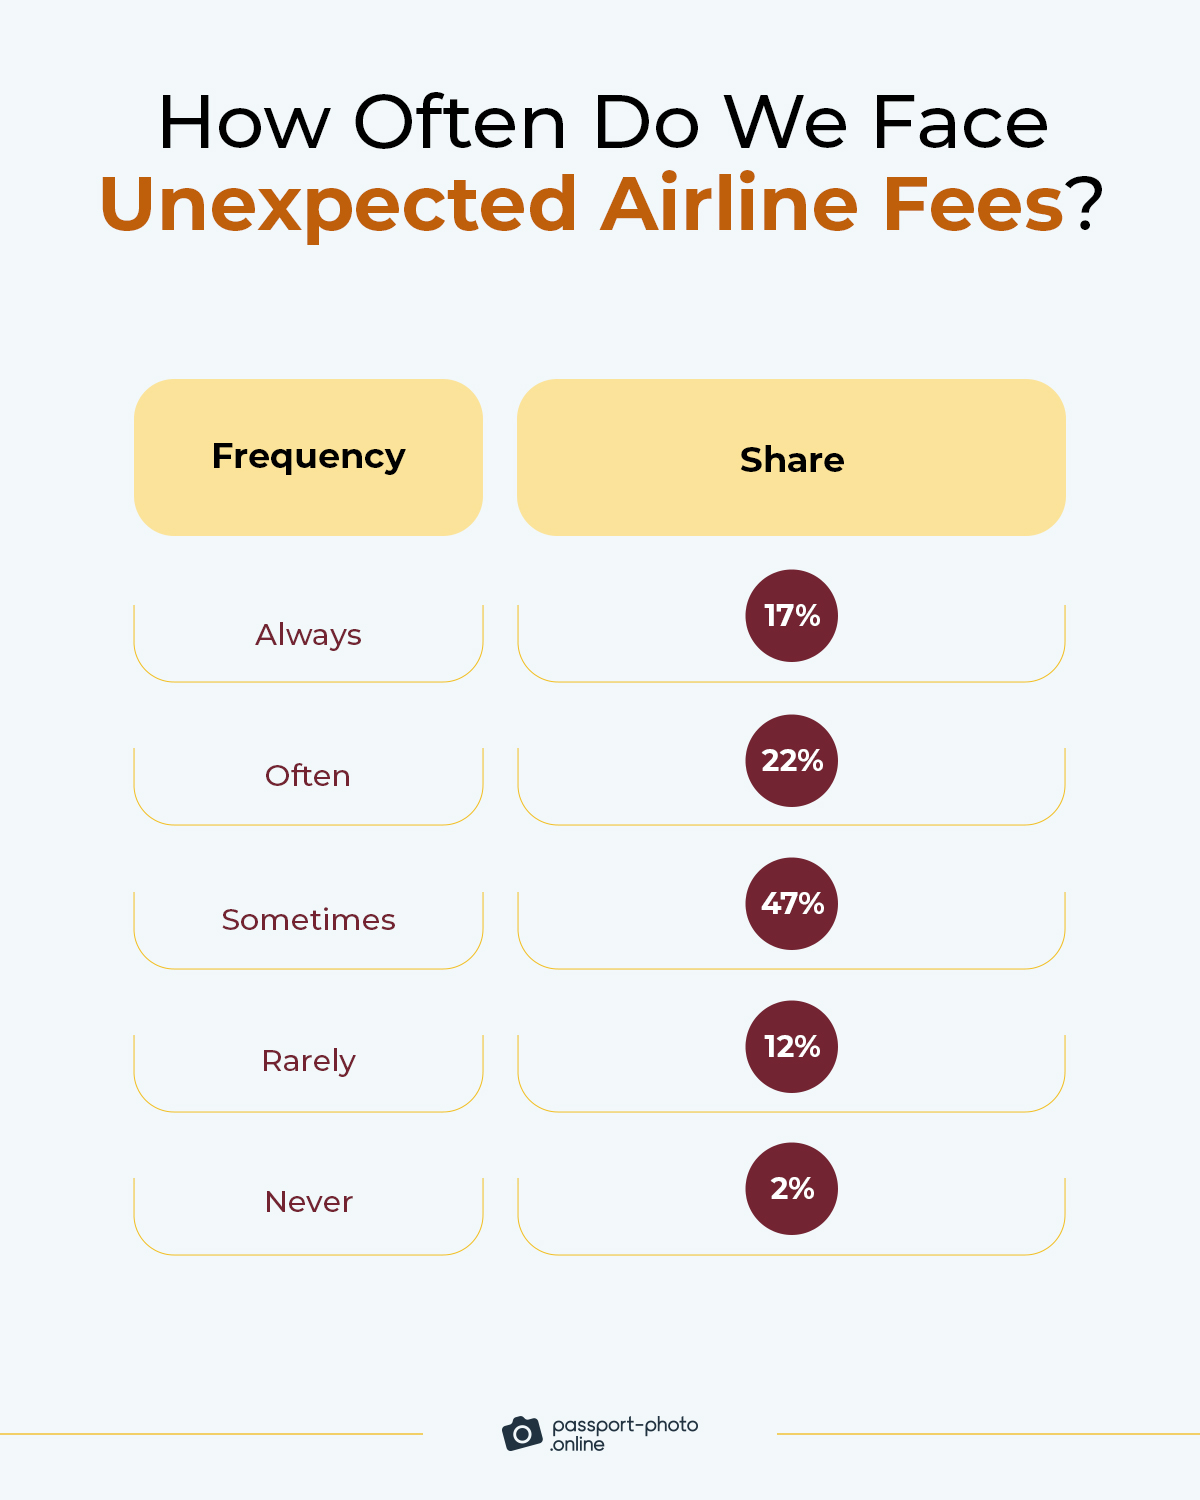 86% of airline passengers run into hidden fees at least sometimes